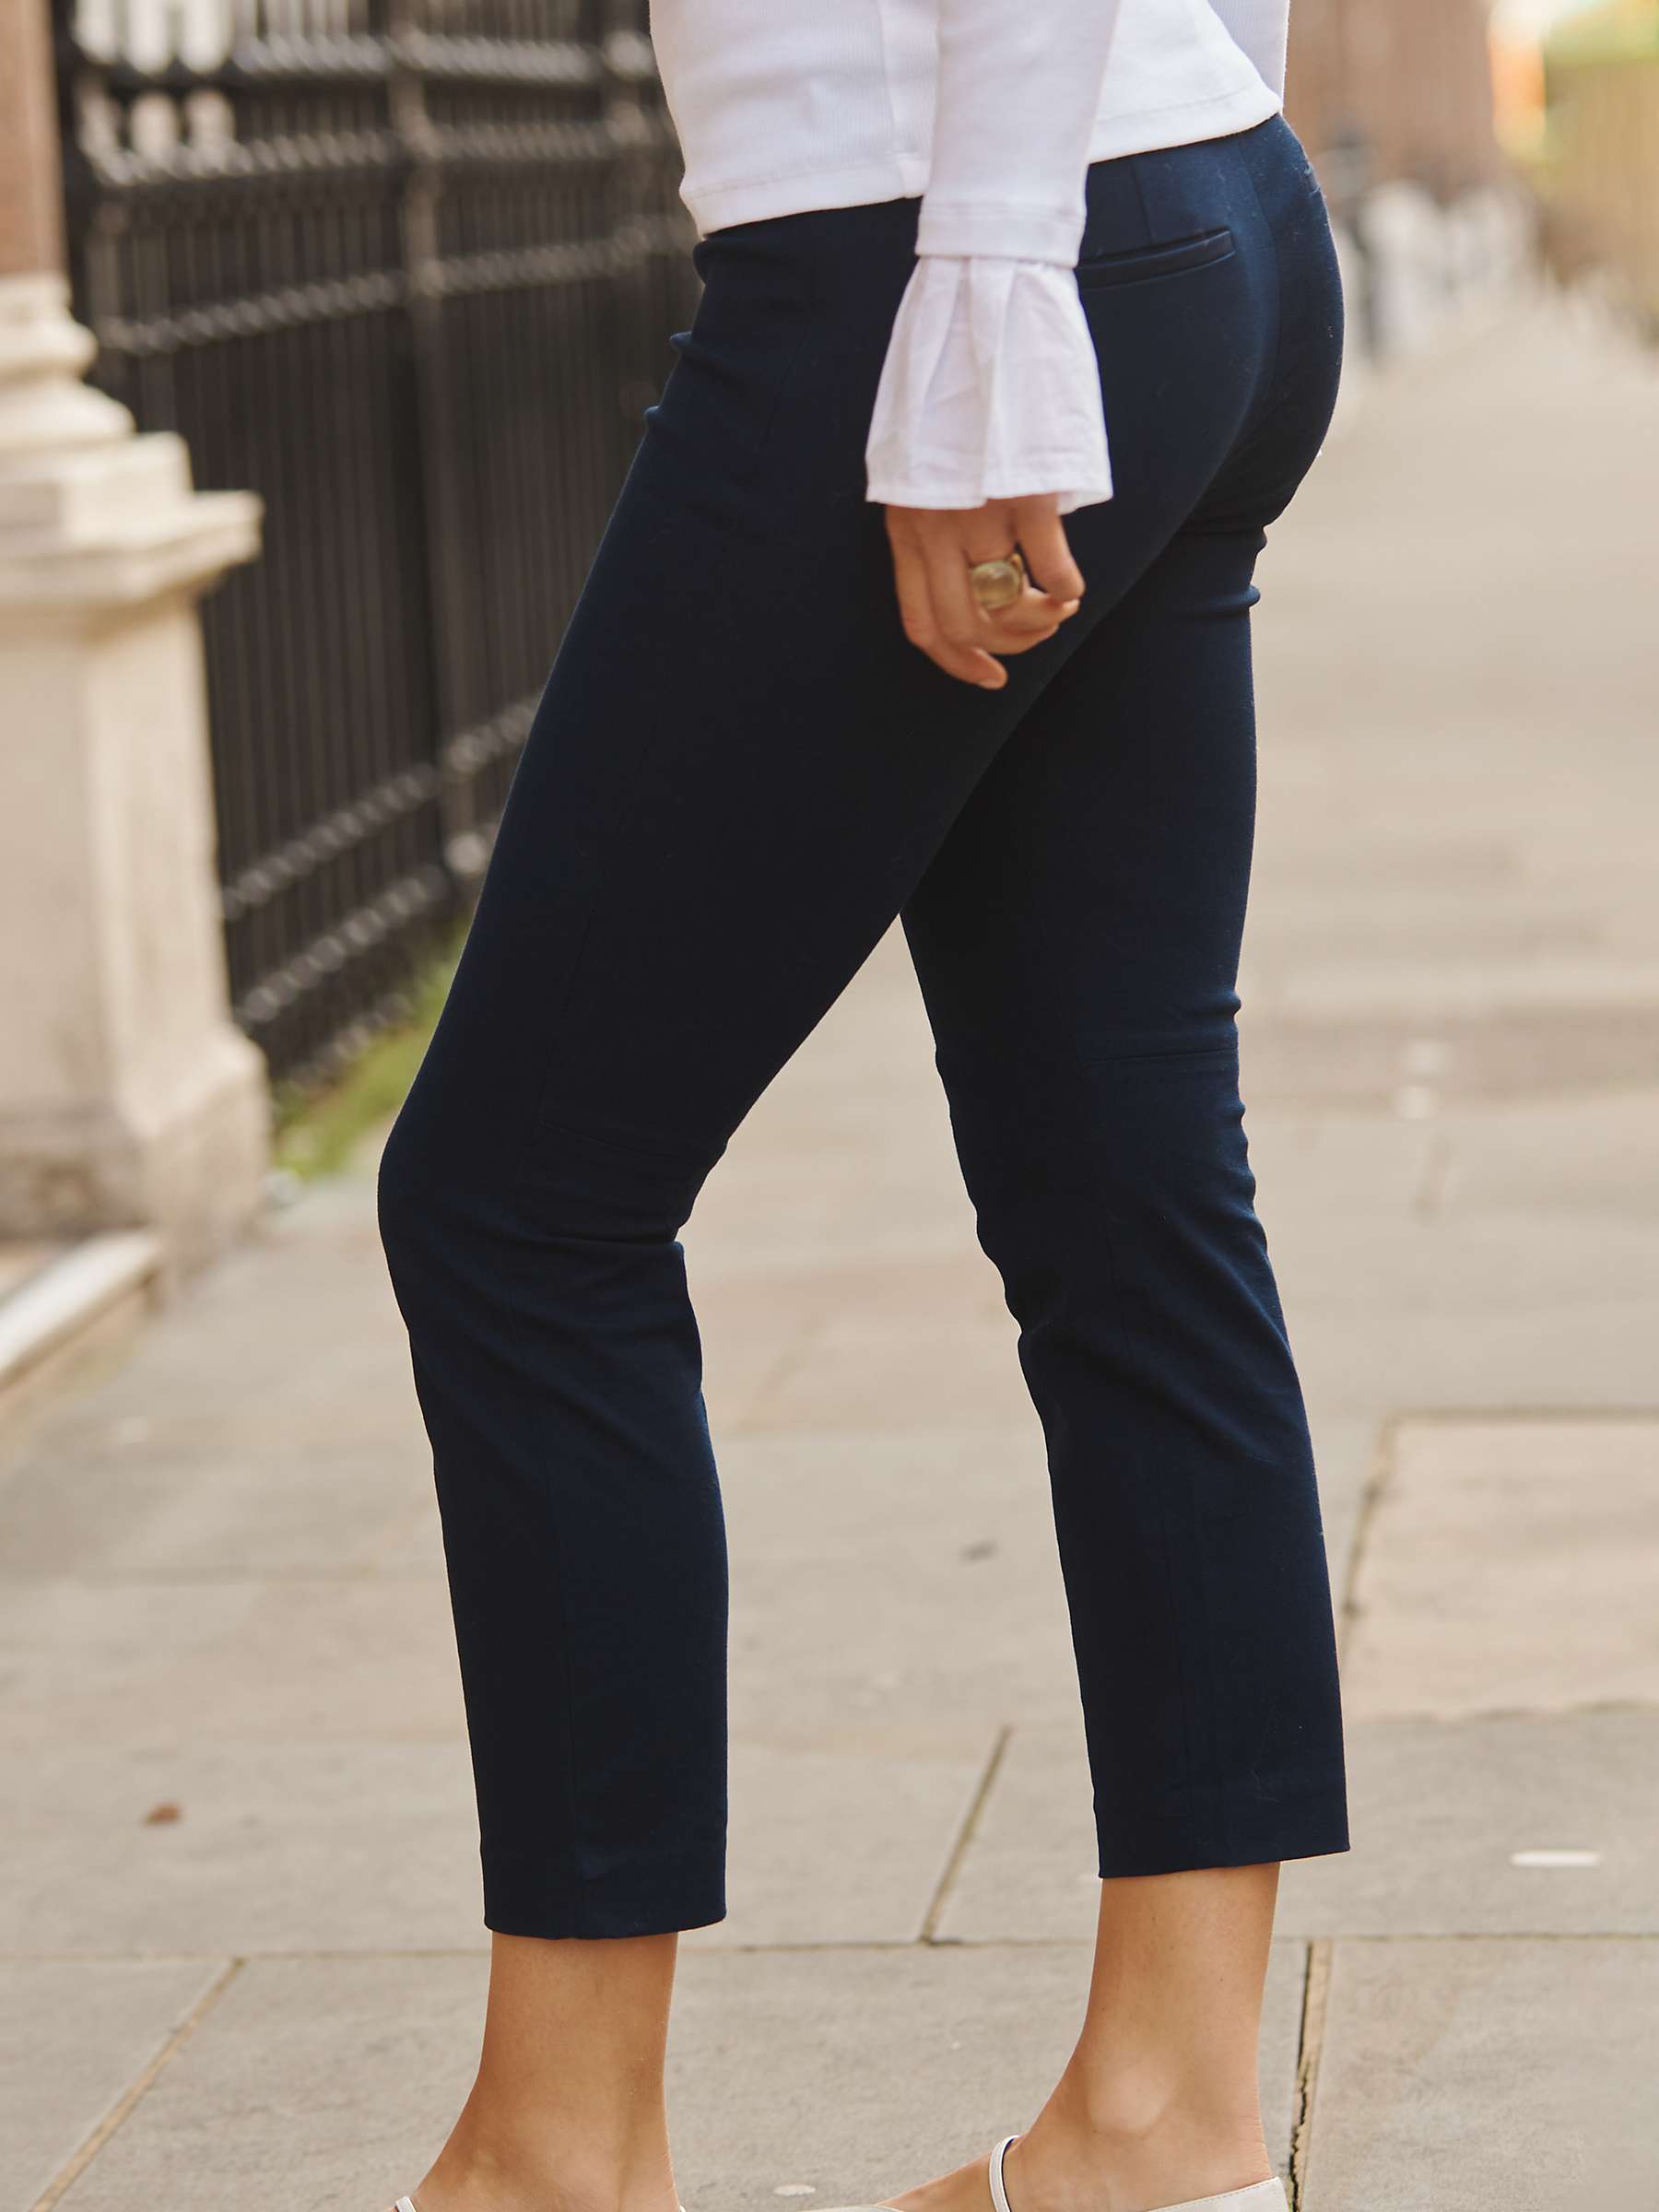 Buy NRBY Frenchie Cotton Blend Stretch Trousers, Navy Online at johnlewis.com